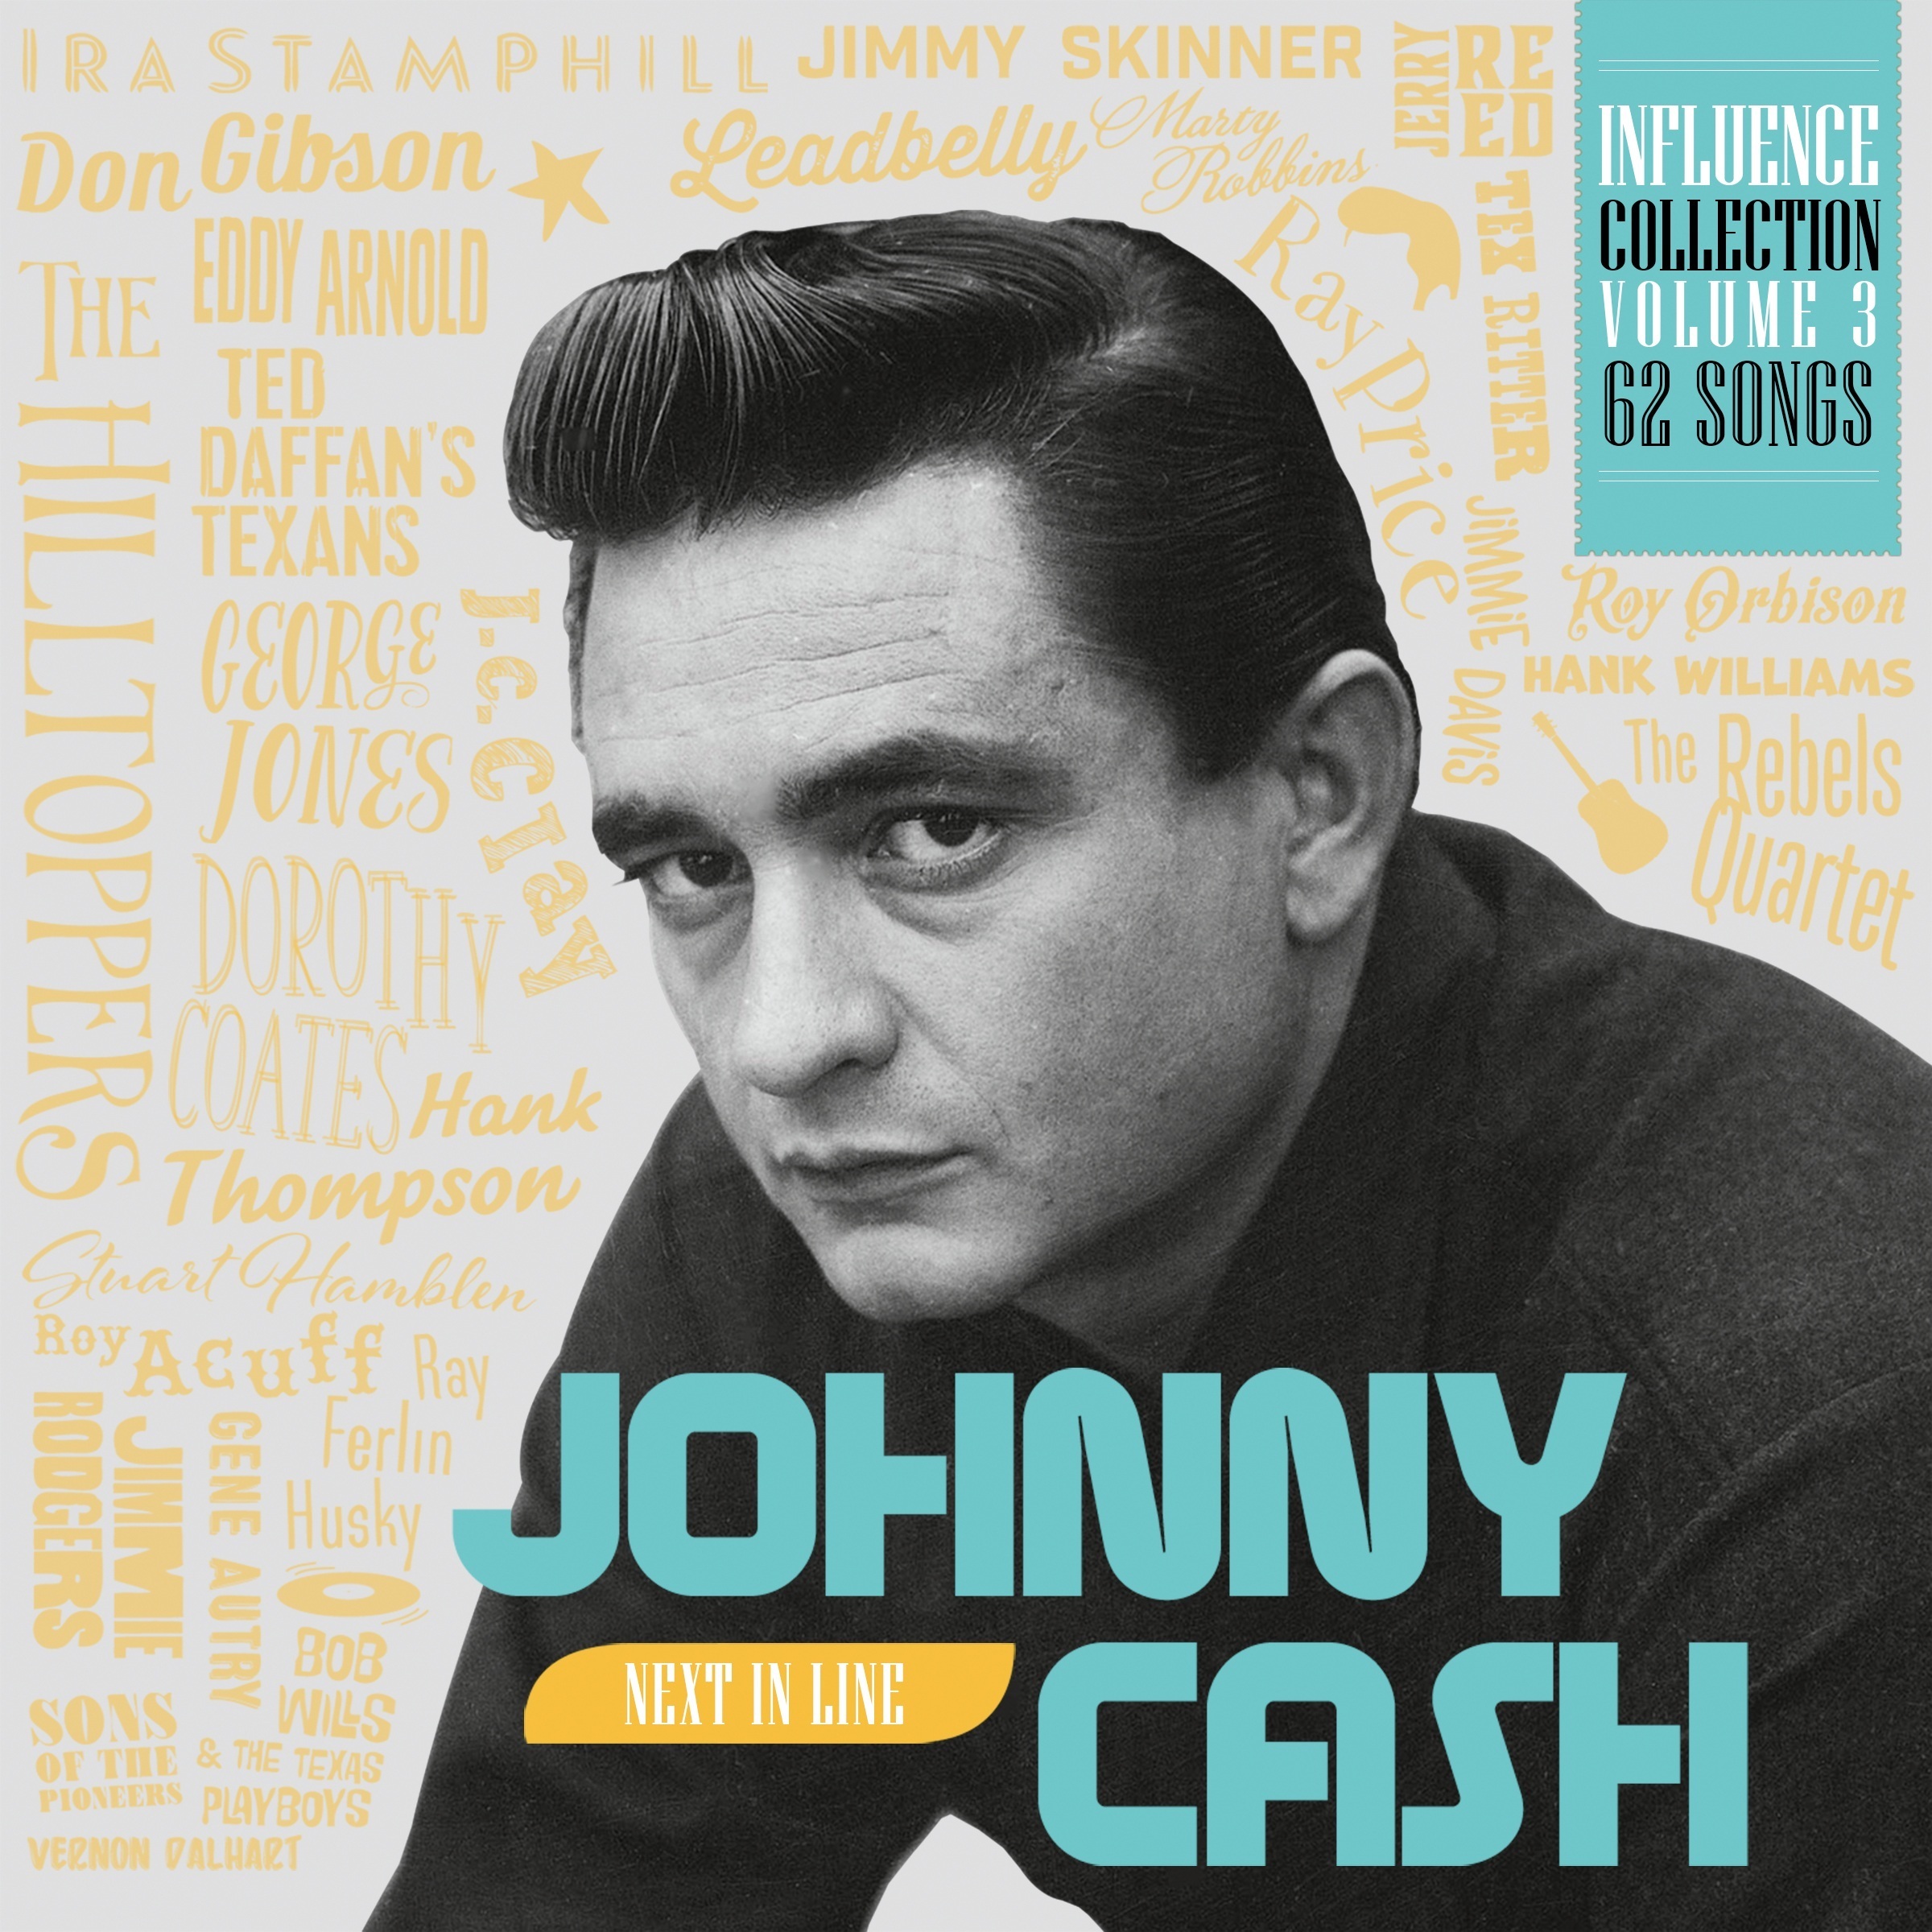 Influence Vol. 3: Johnny Cash, Next in Line